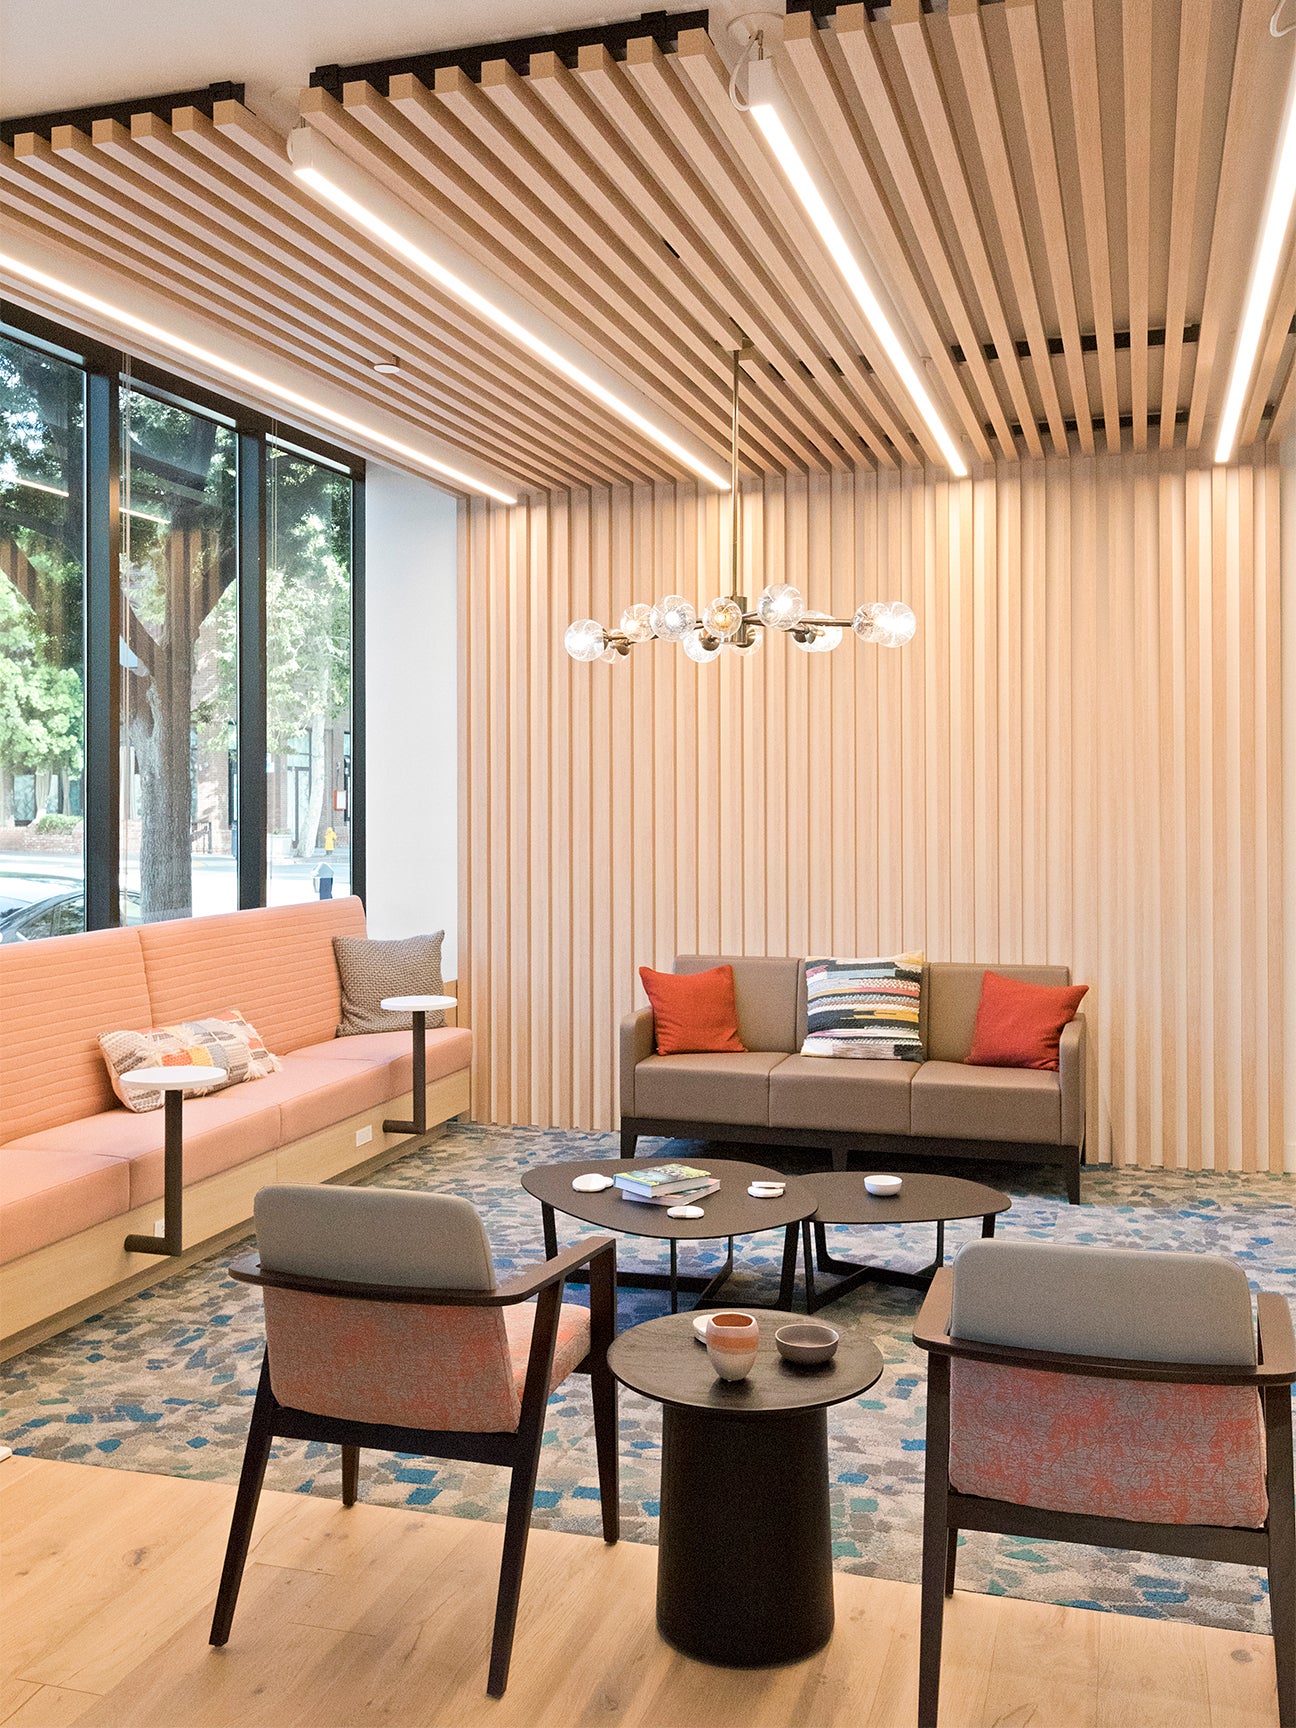 Waiting room with wood panels and colorful sofas